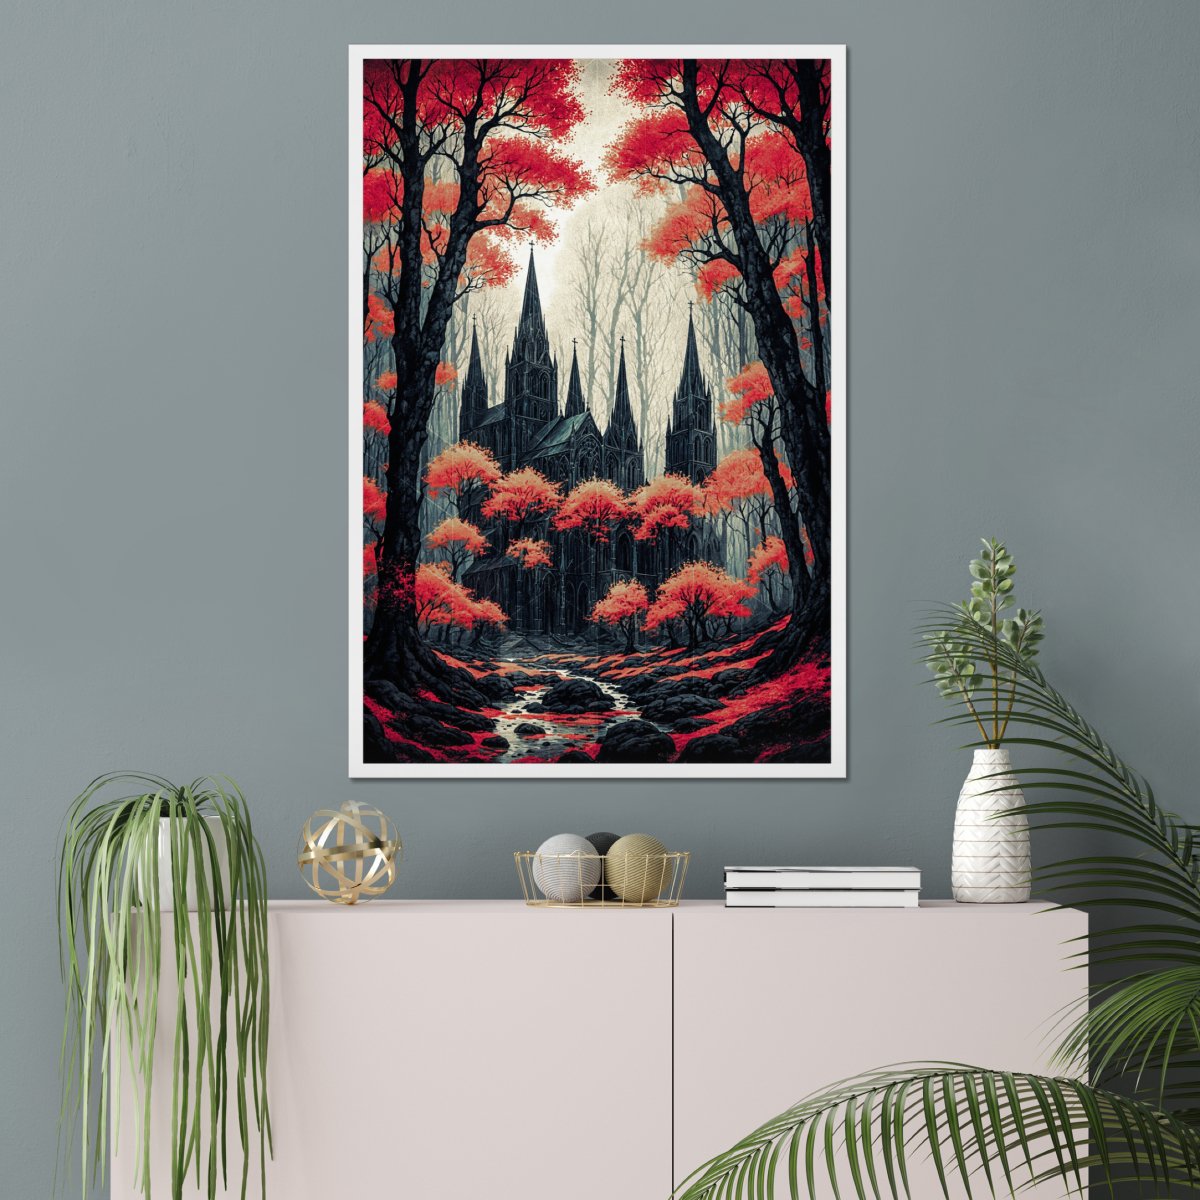 Crimson gloom cathedral - Art print - Poster - Ever colorful